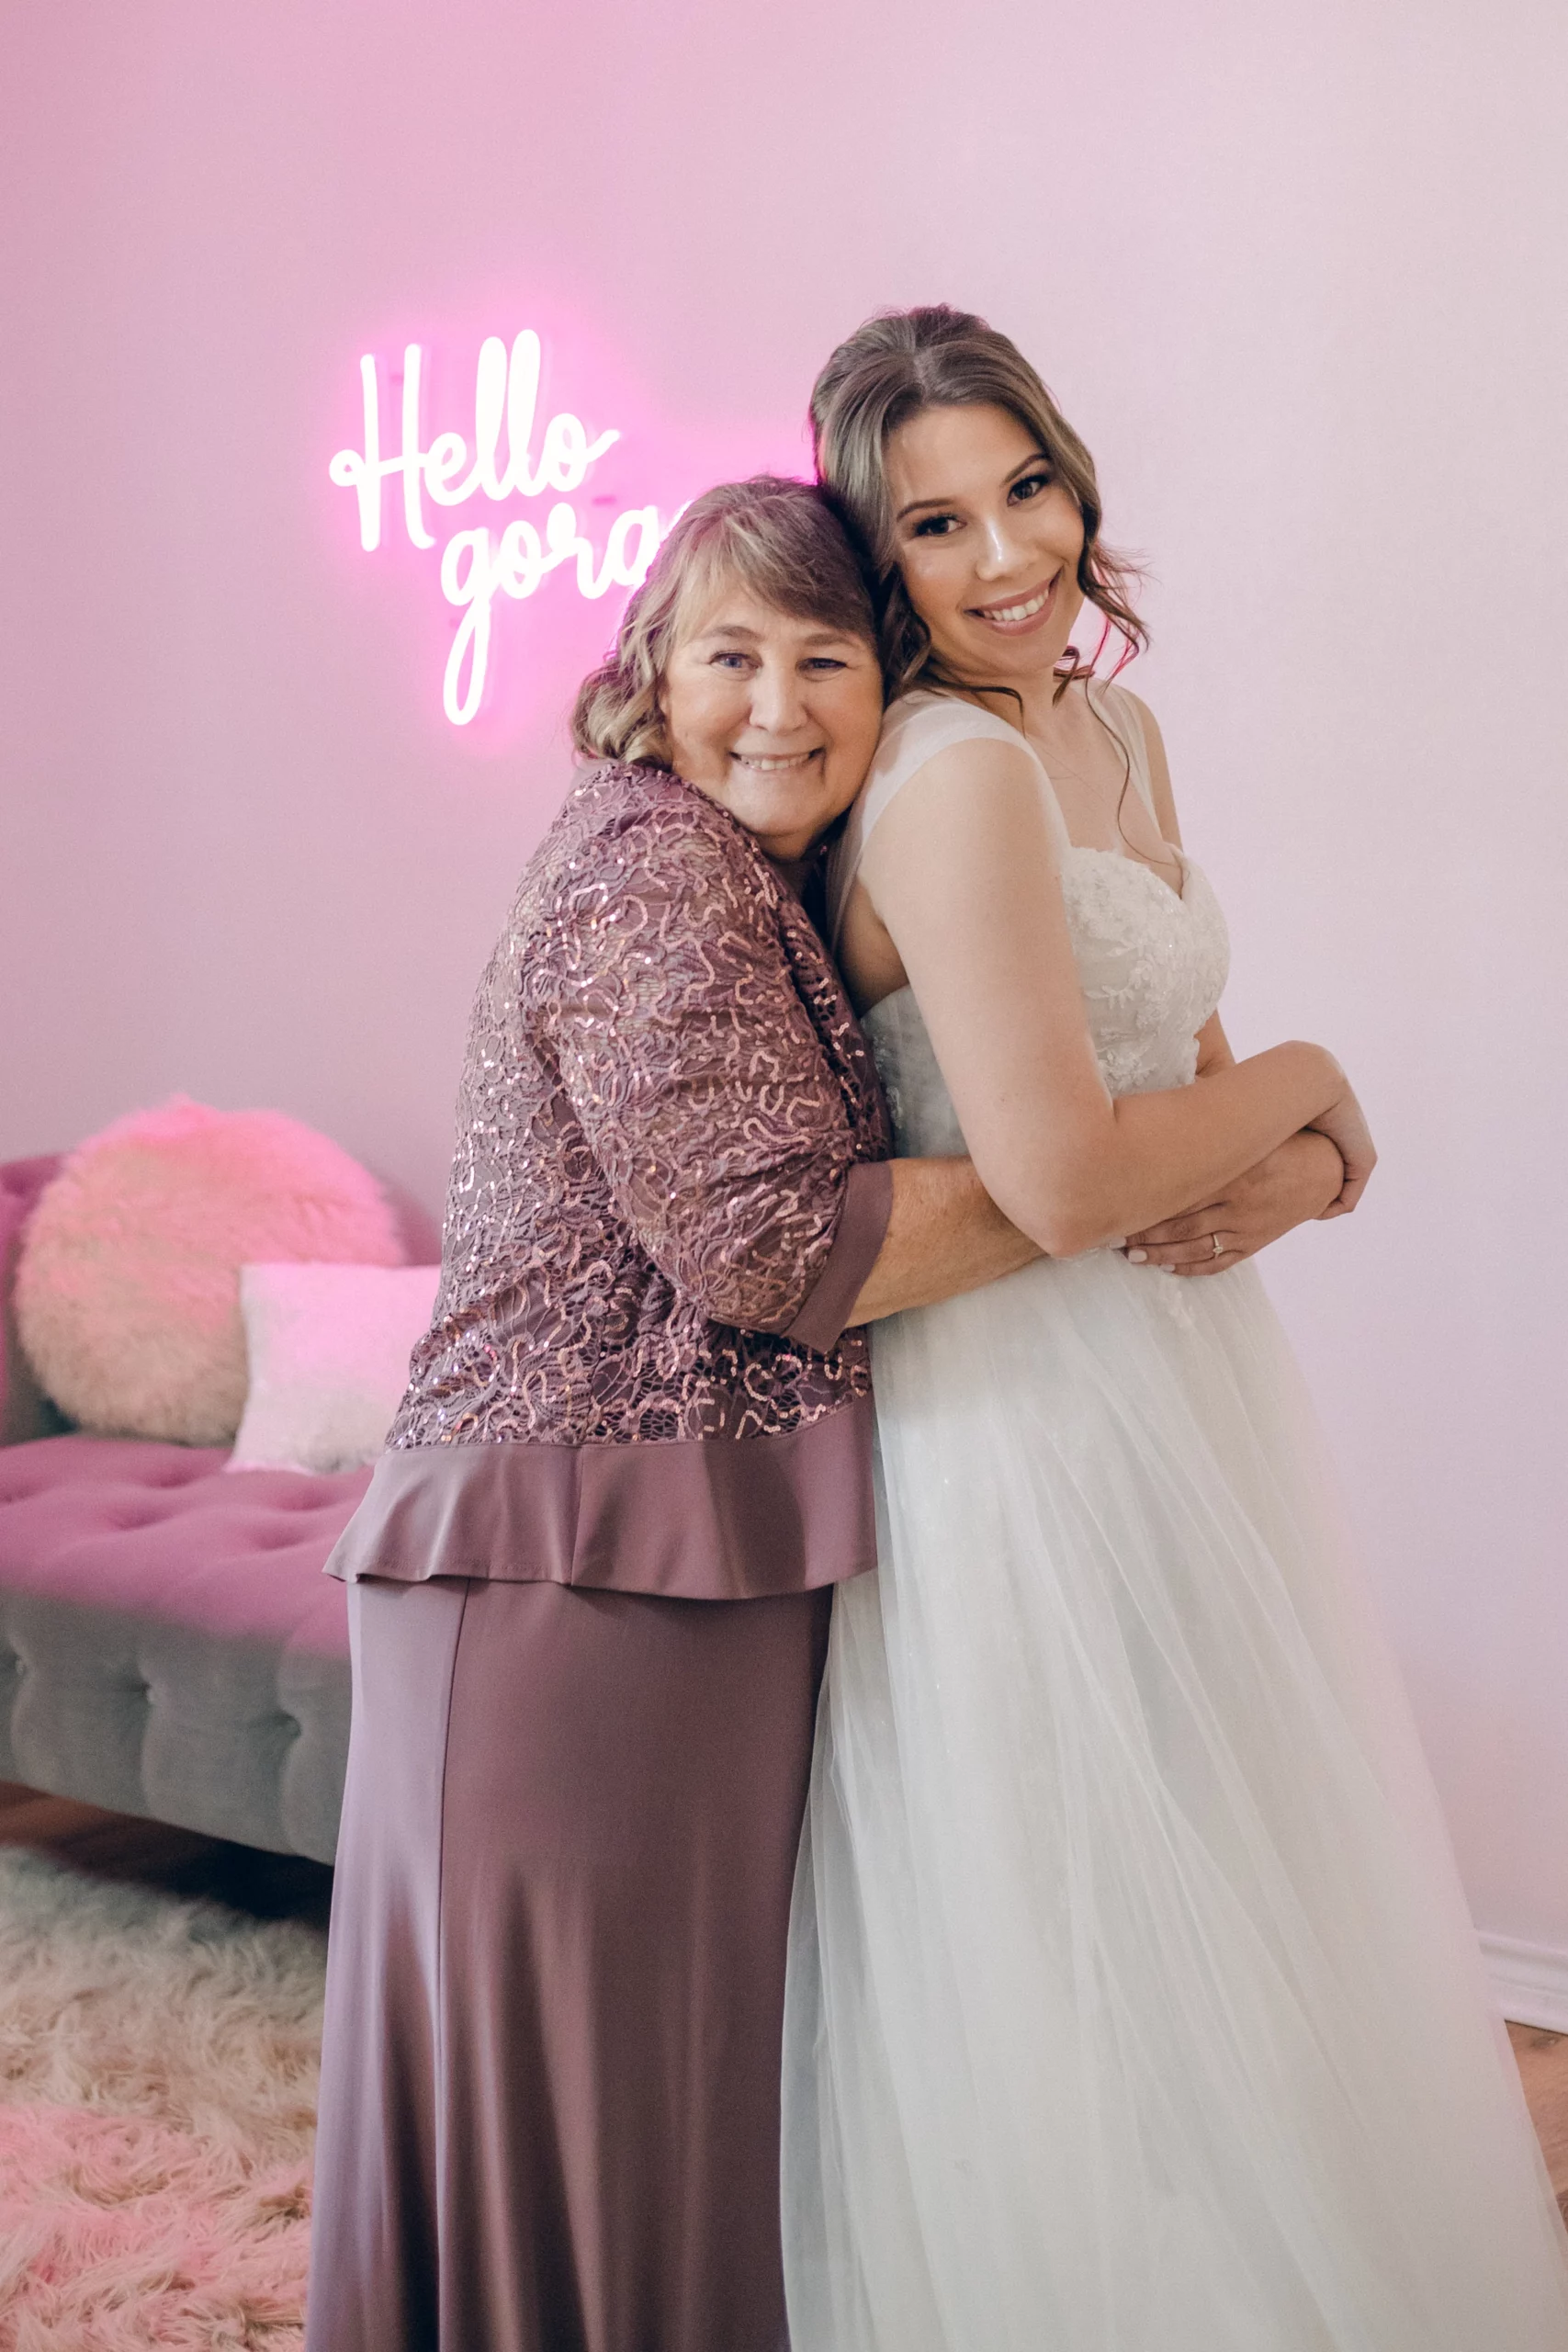 Clara's mother hugs her from behind as they smile at the camera